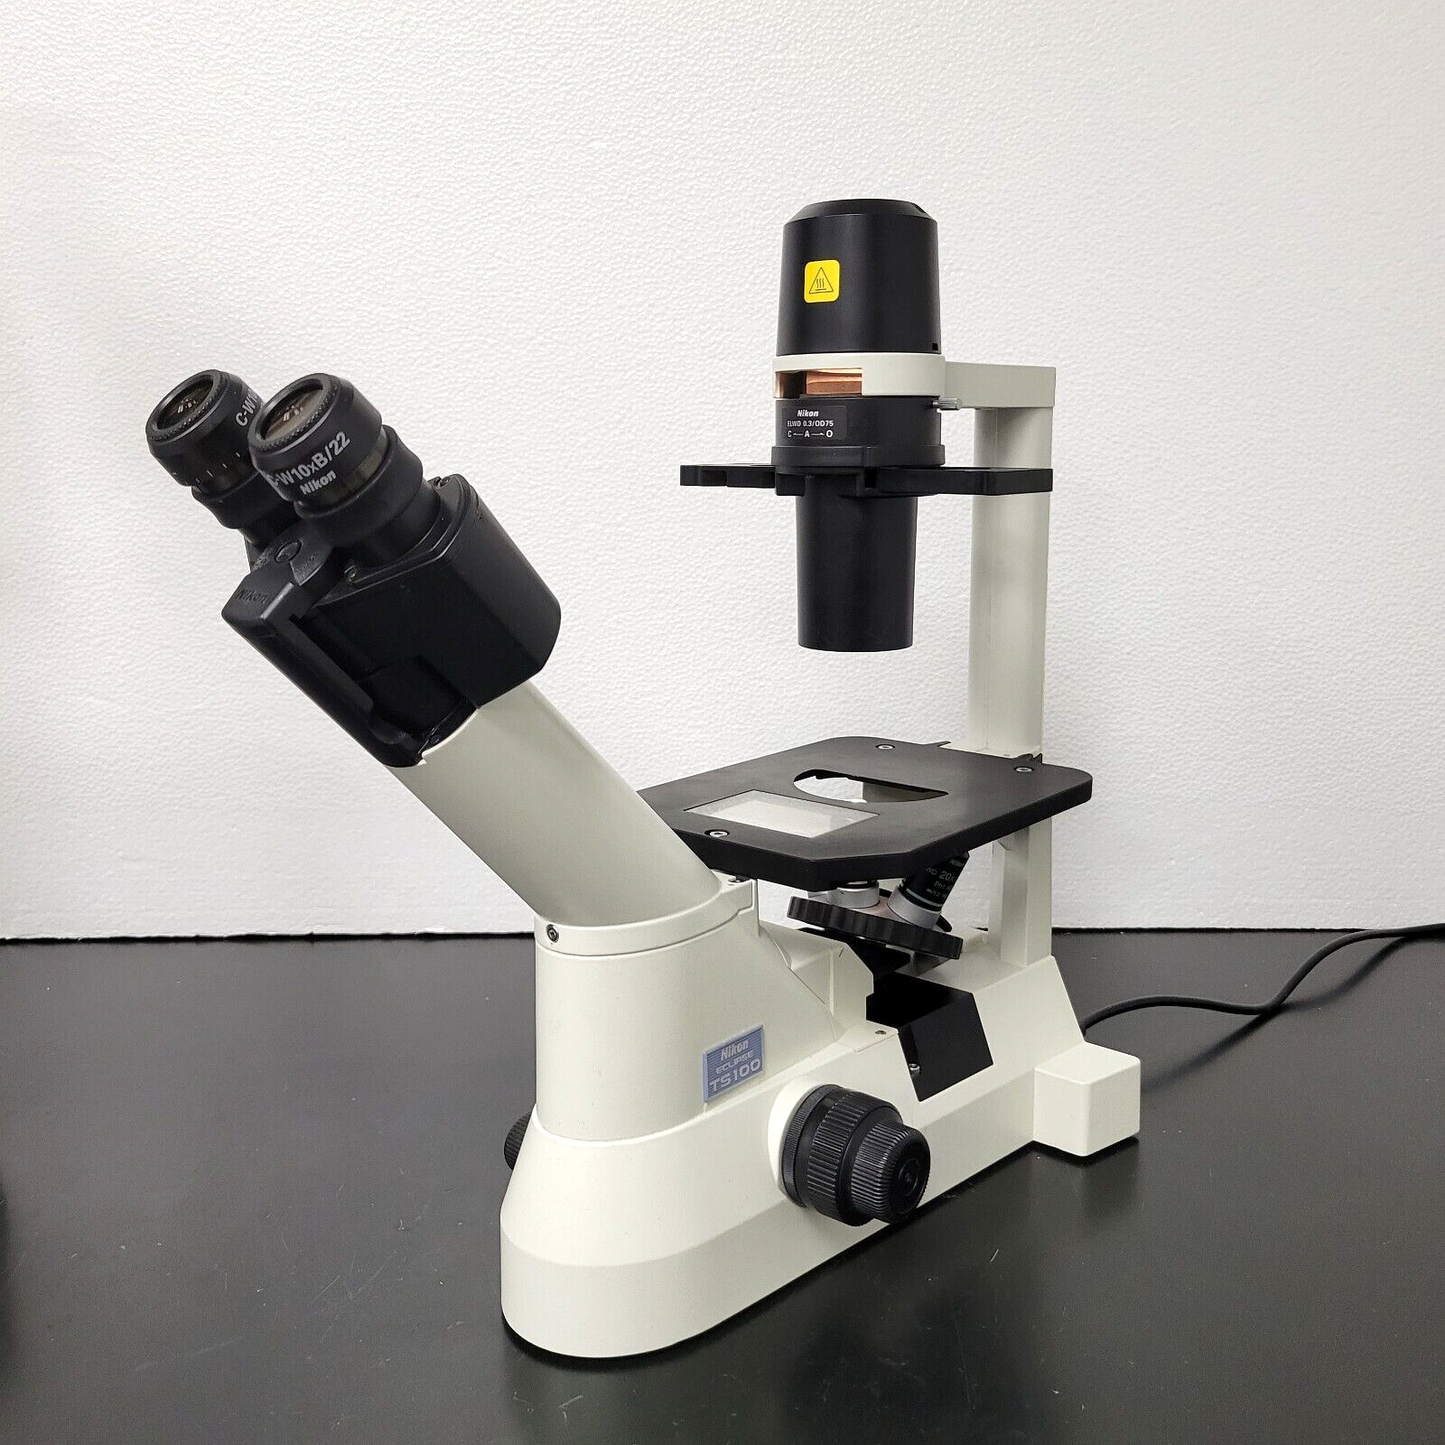 Nikon Microscope Eclipse TS100 with Phase Contrast Tissue Culture - microscopemarketplace